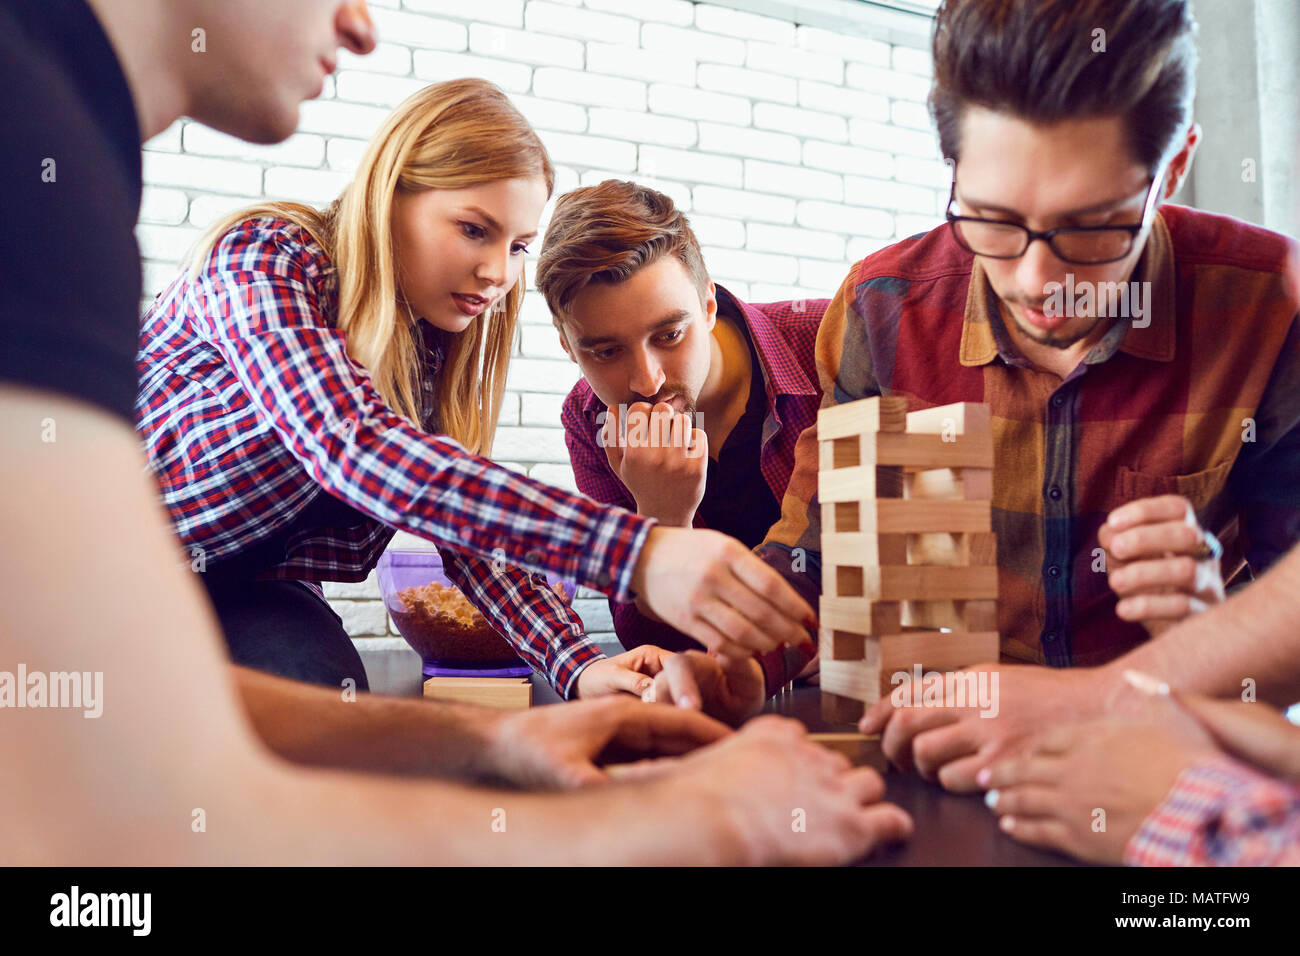 A cheerful group of friends play board games. Stock Photo